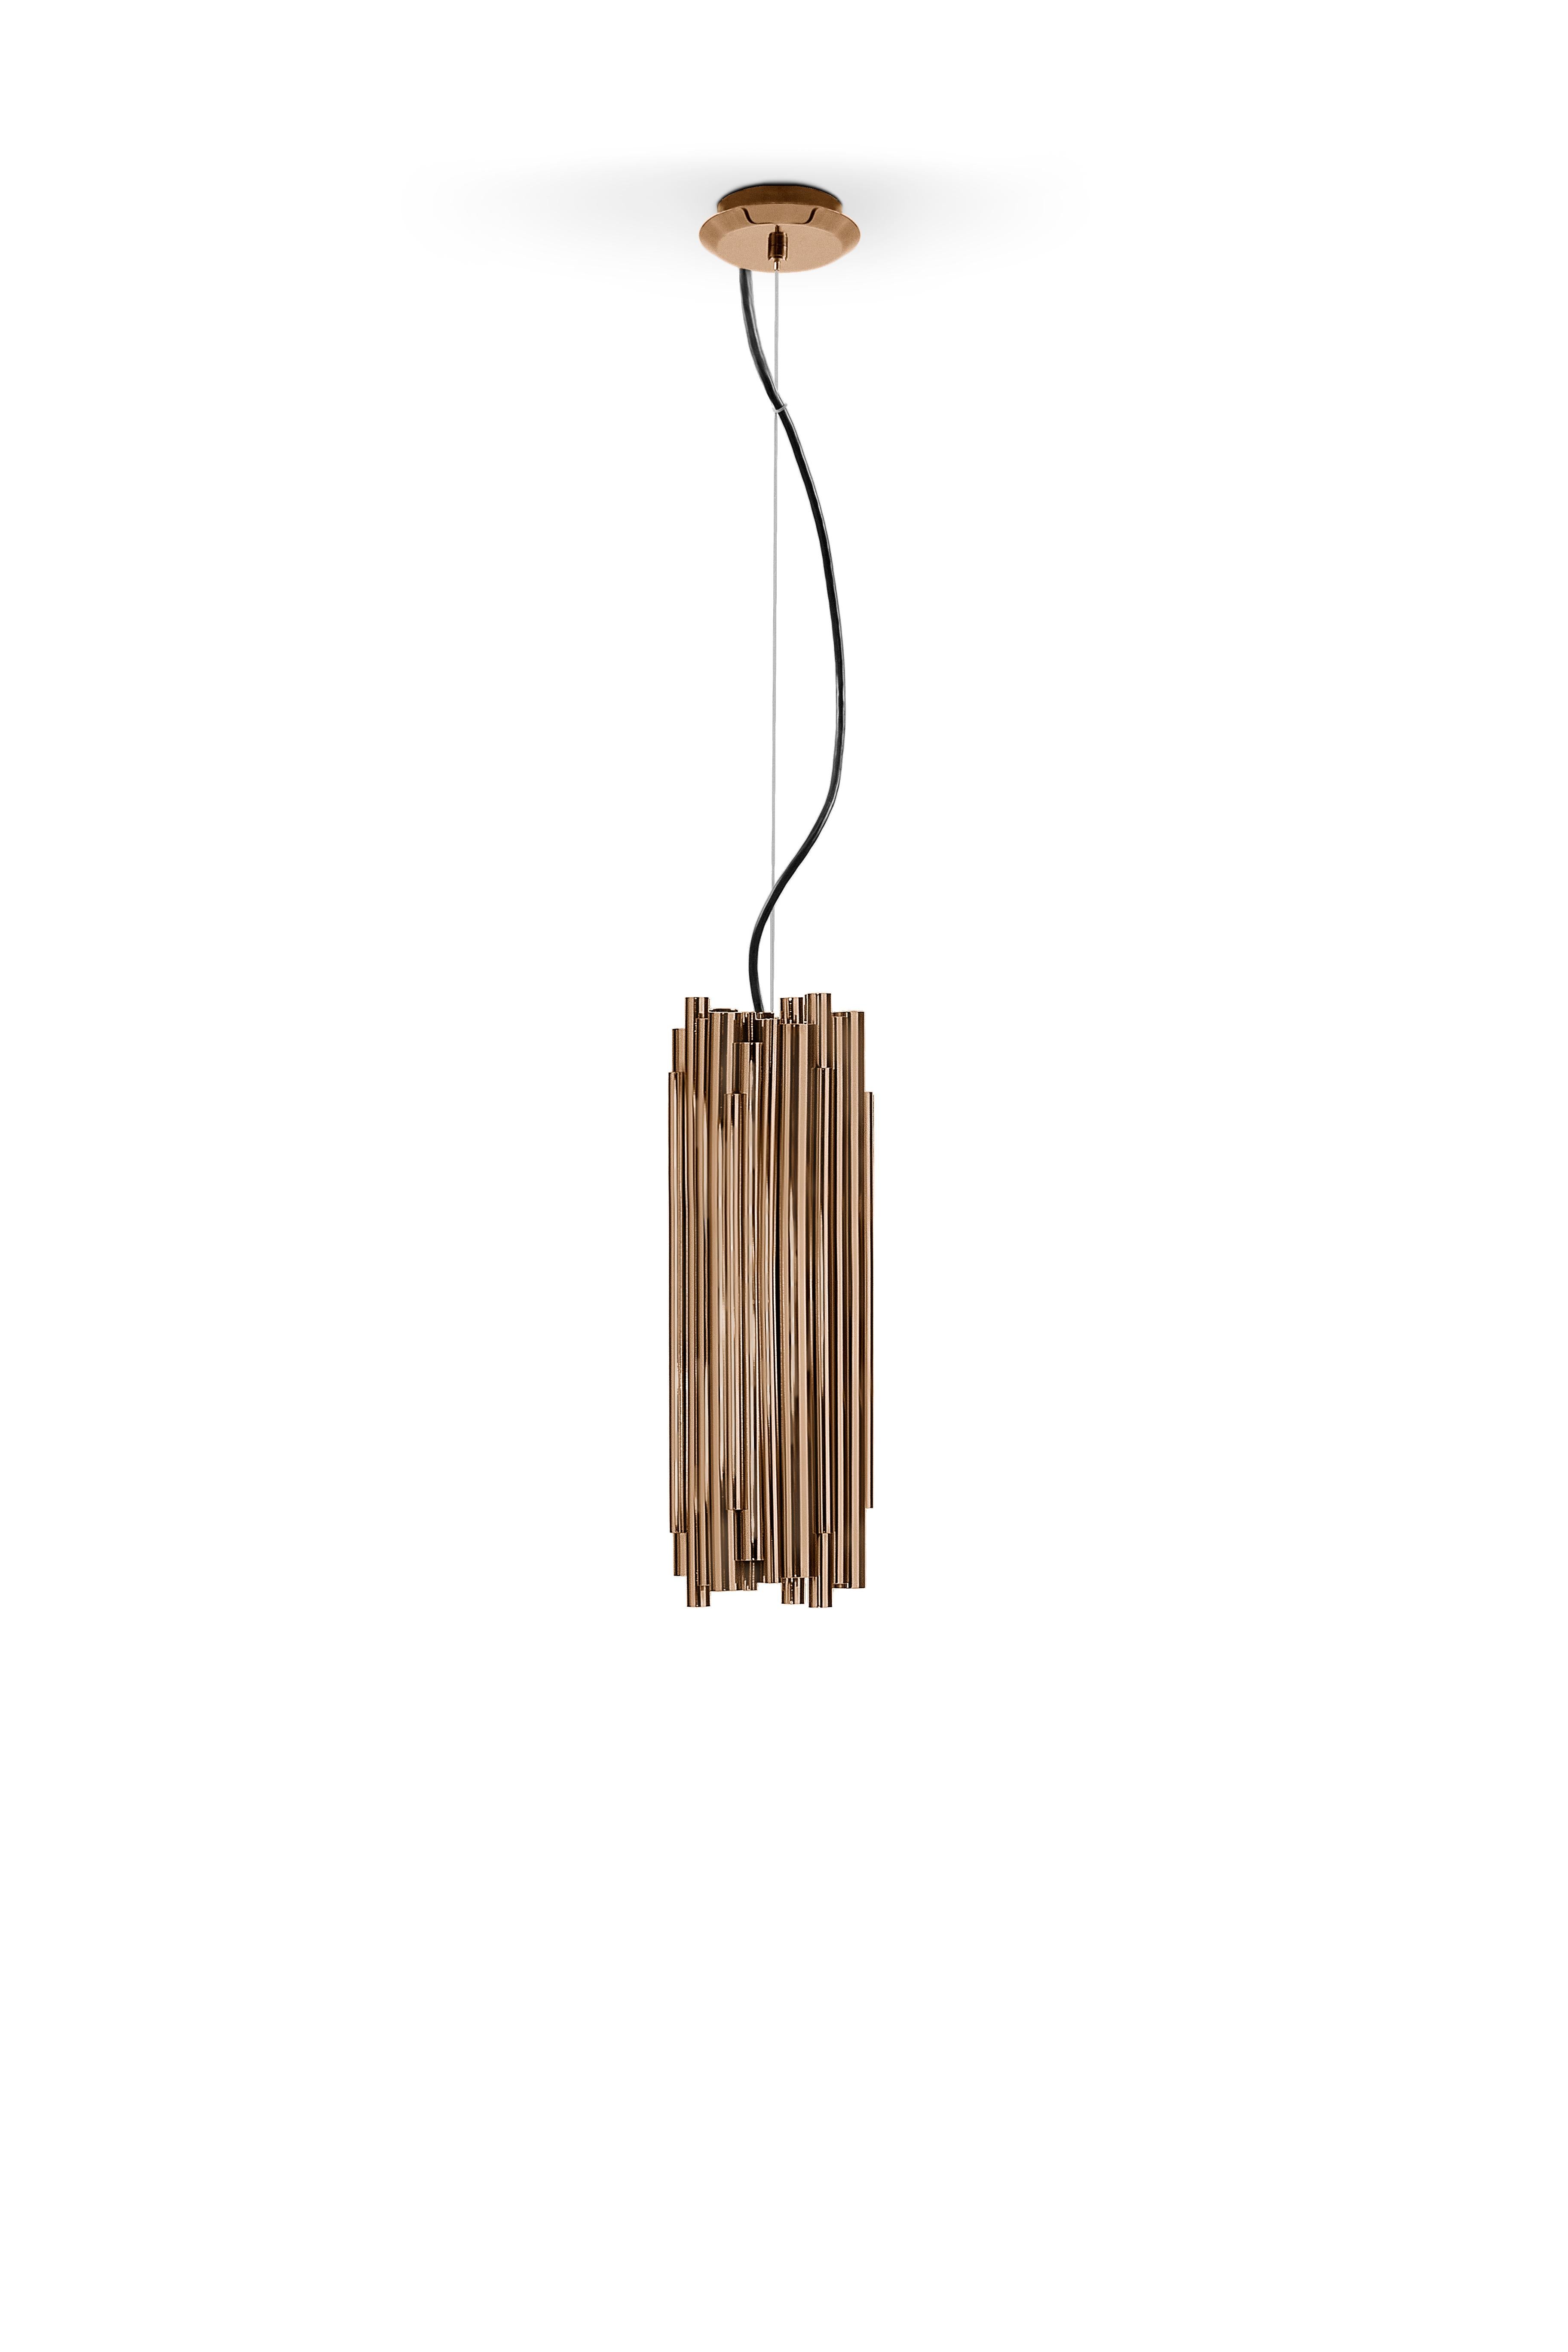 Inspired by the American jazz Pianist Dave Brubeck, Brubeck's pendant lamp is a great example of when art deco design exceptionally meets music. The result of this outstanding creation is a functional handmade lighting design with a sculptural